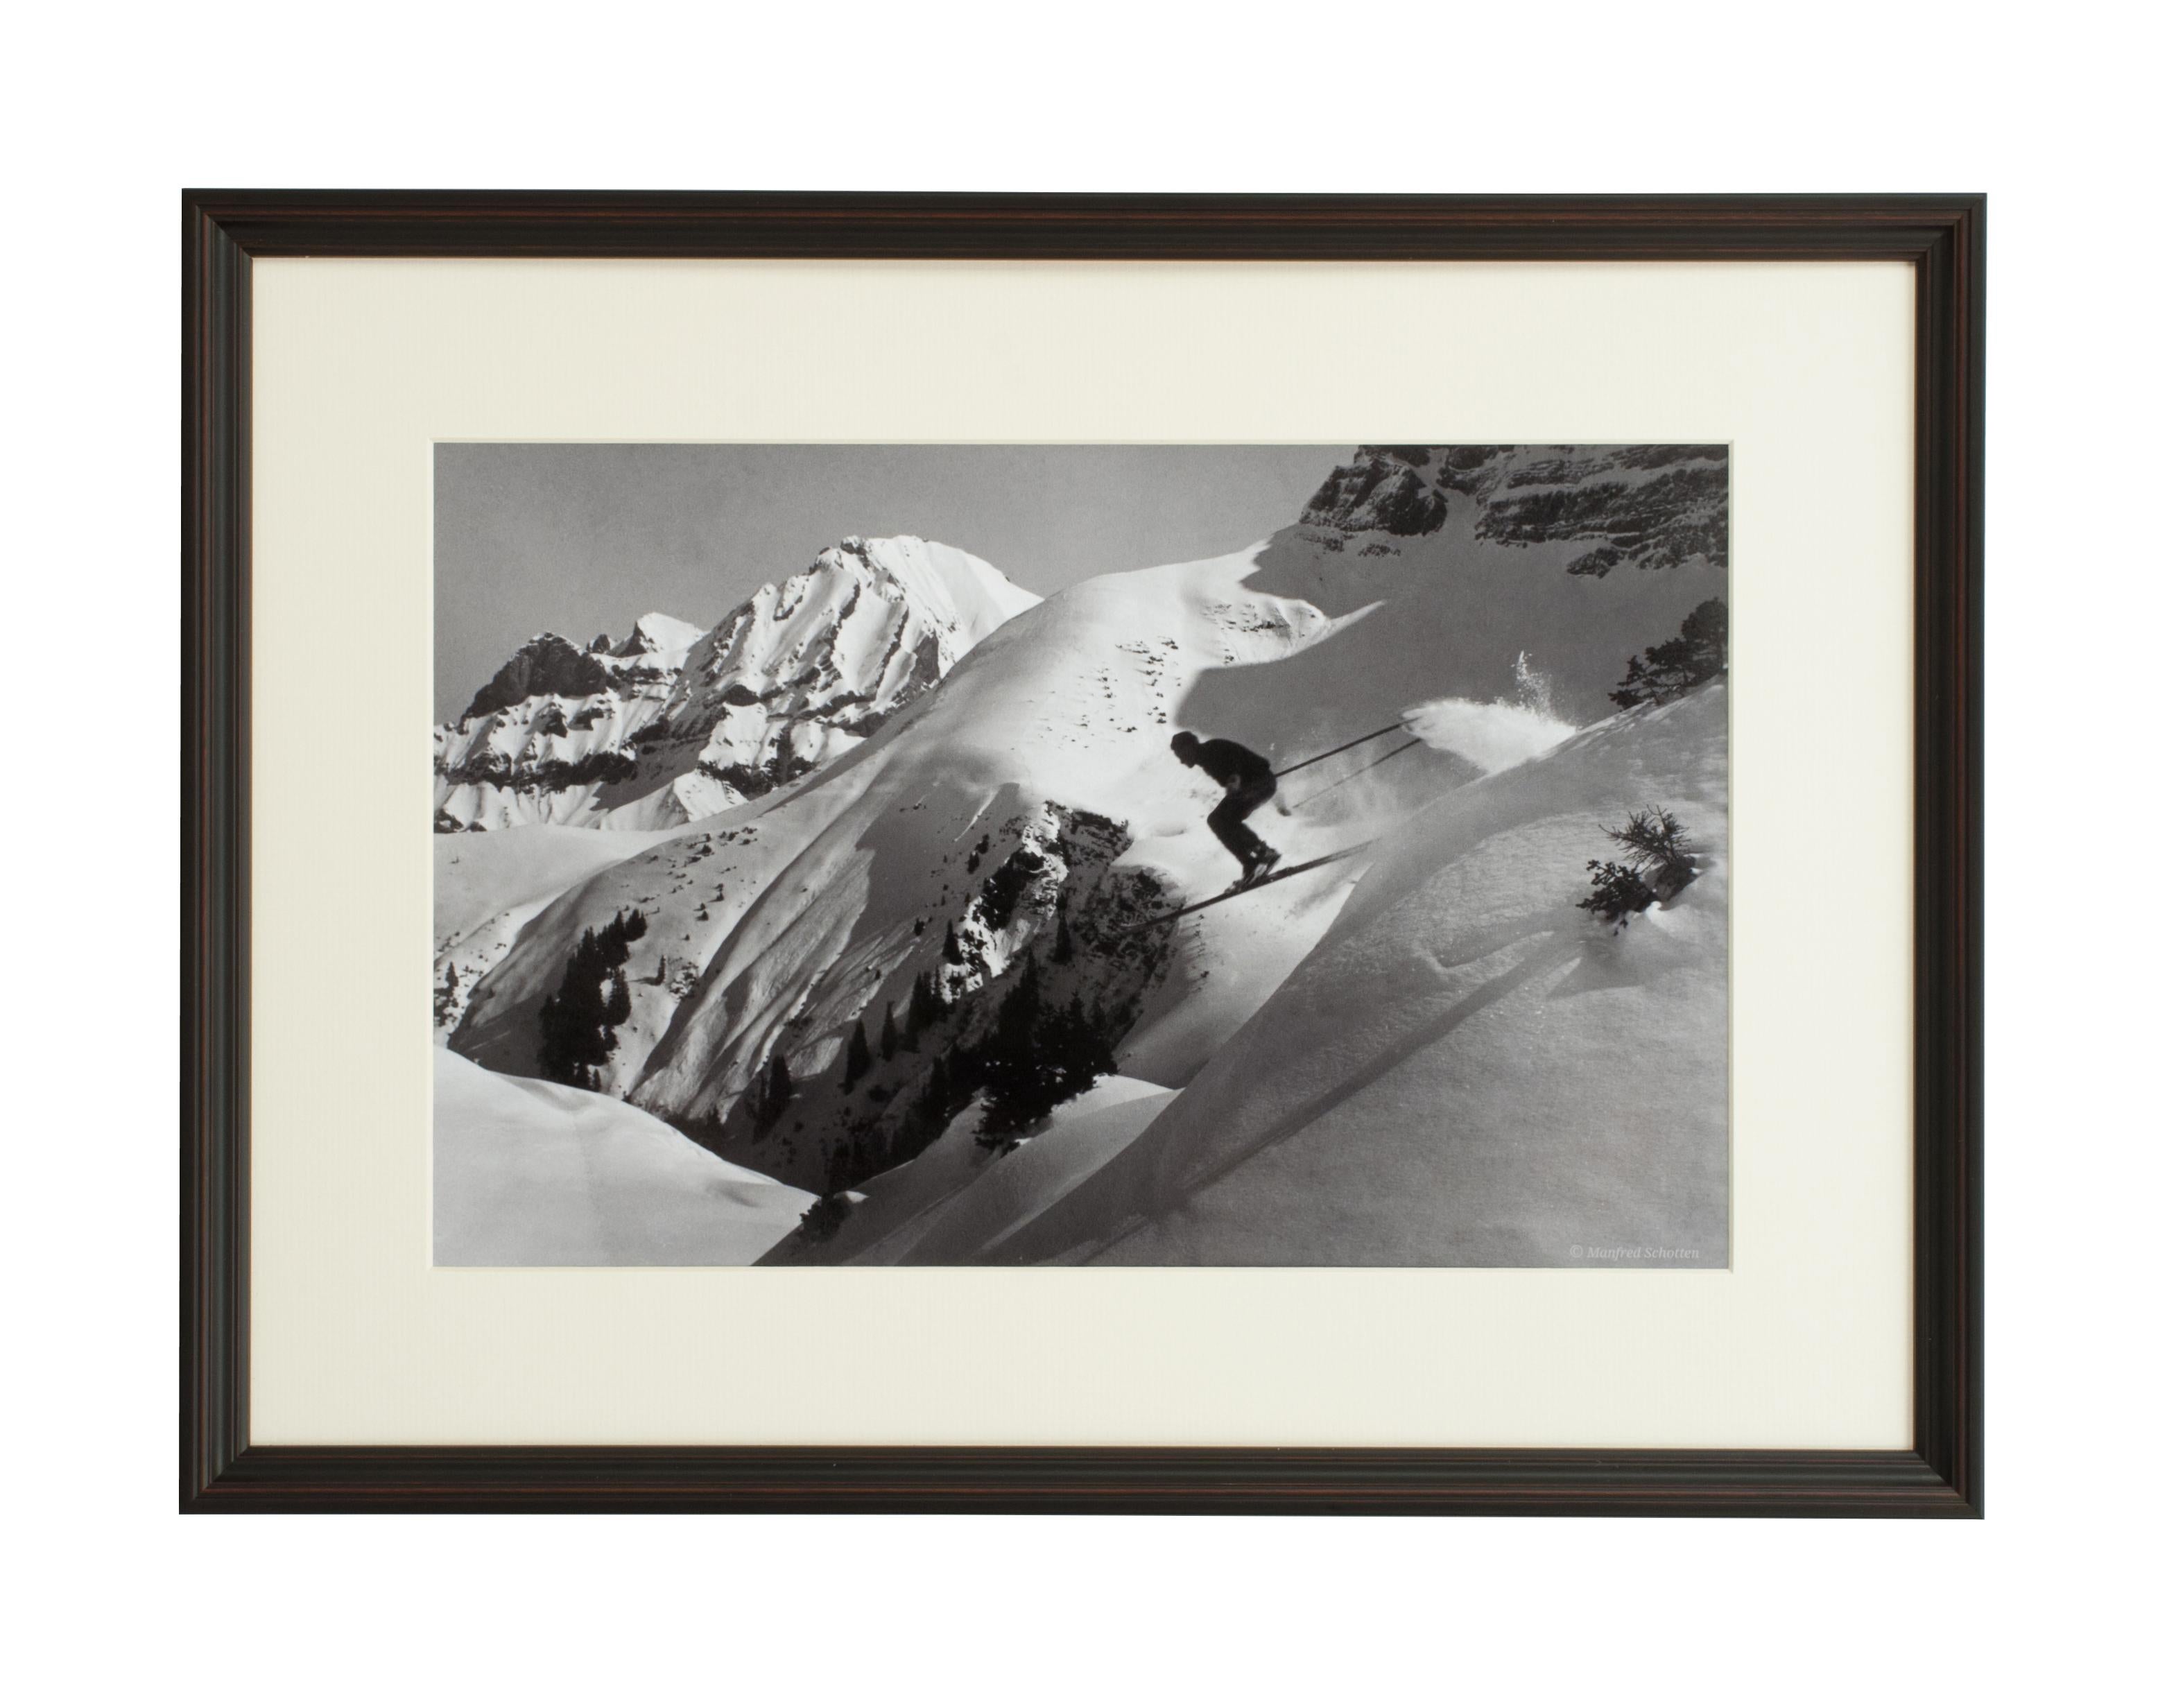 Alpine Ski Photograph, 'THE JUMP' Taken from 1930s Original For Sale 3